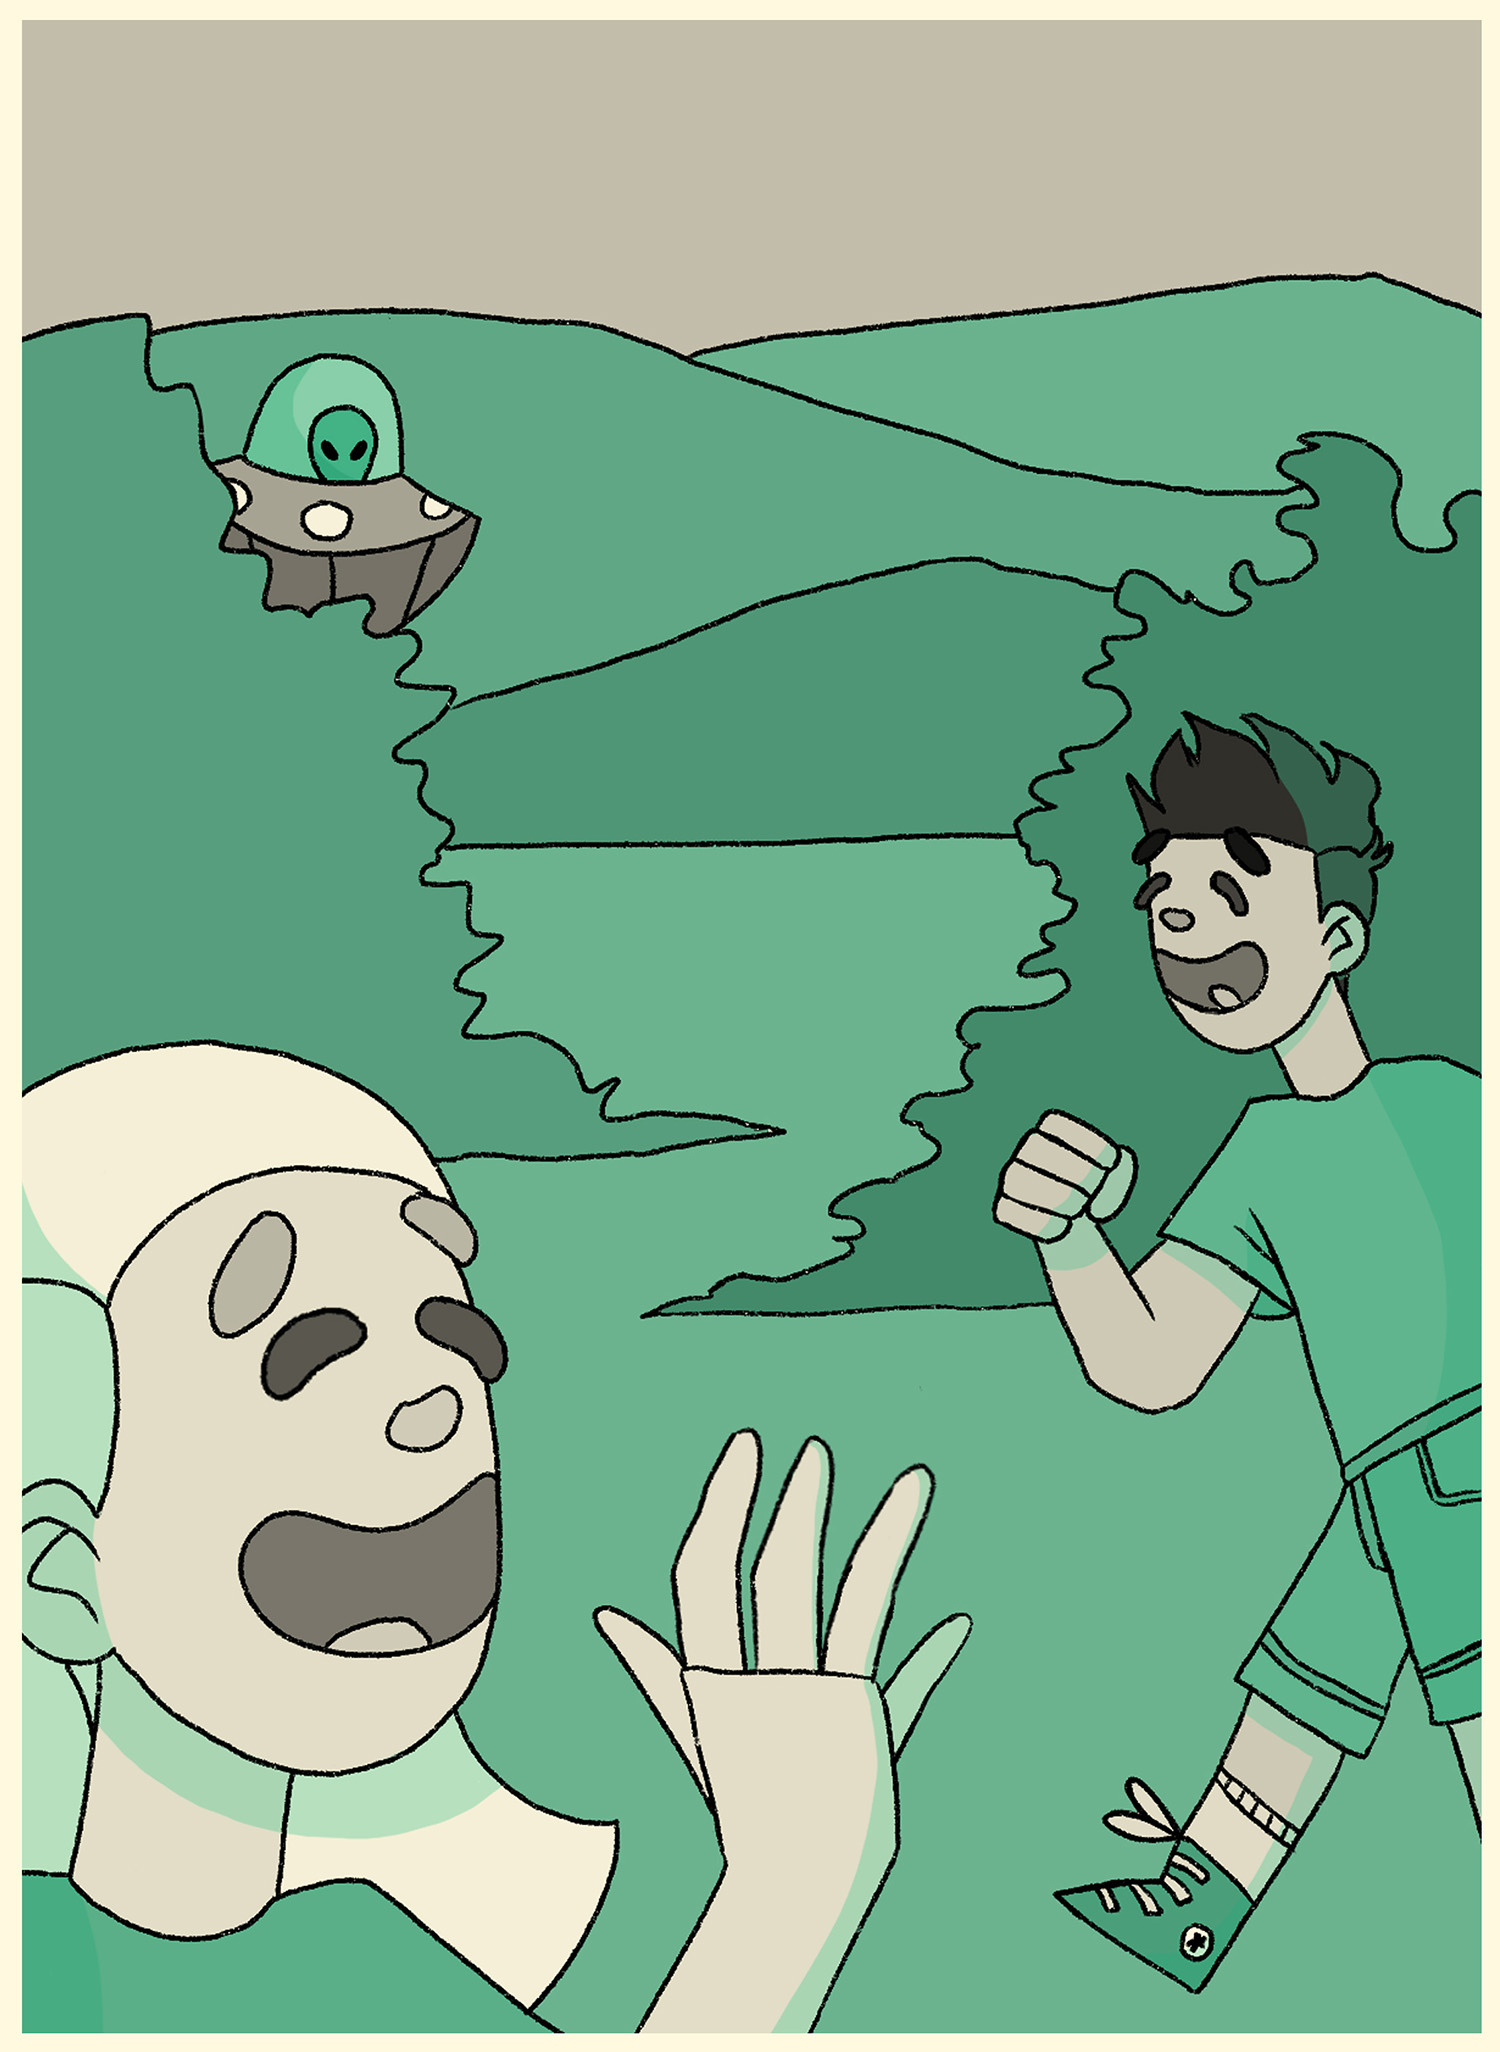 Illustration student work in shades of green and grey showing a grassy, hilly outdoor scene with two cartoon figures in the foreground. An alien in a small ship hides behind a bush.